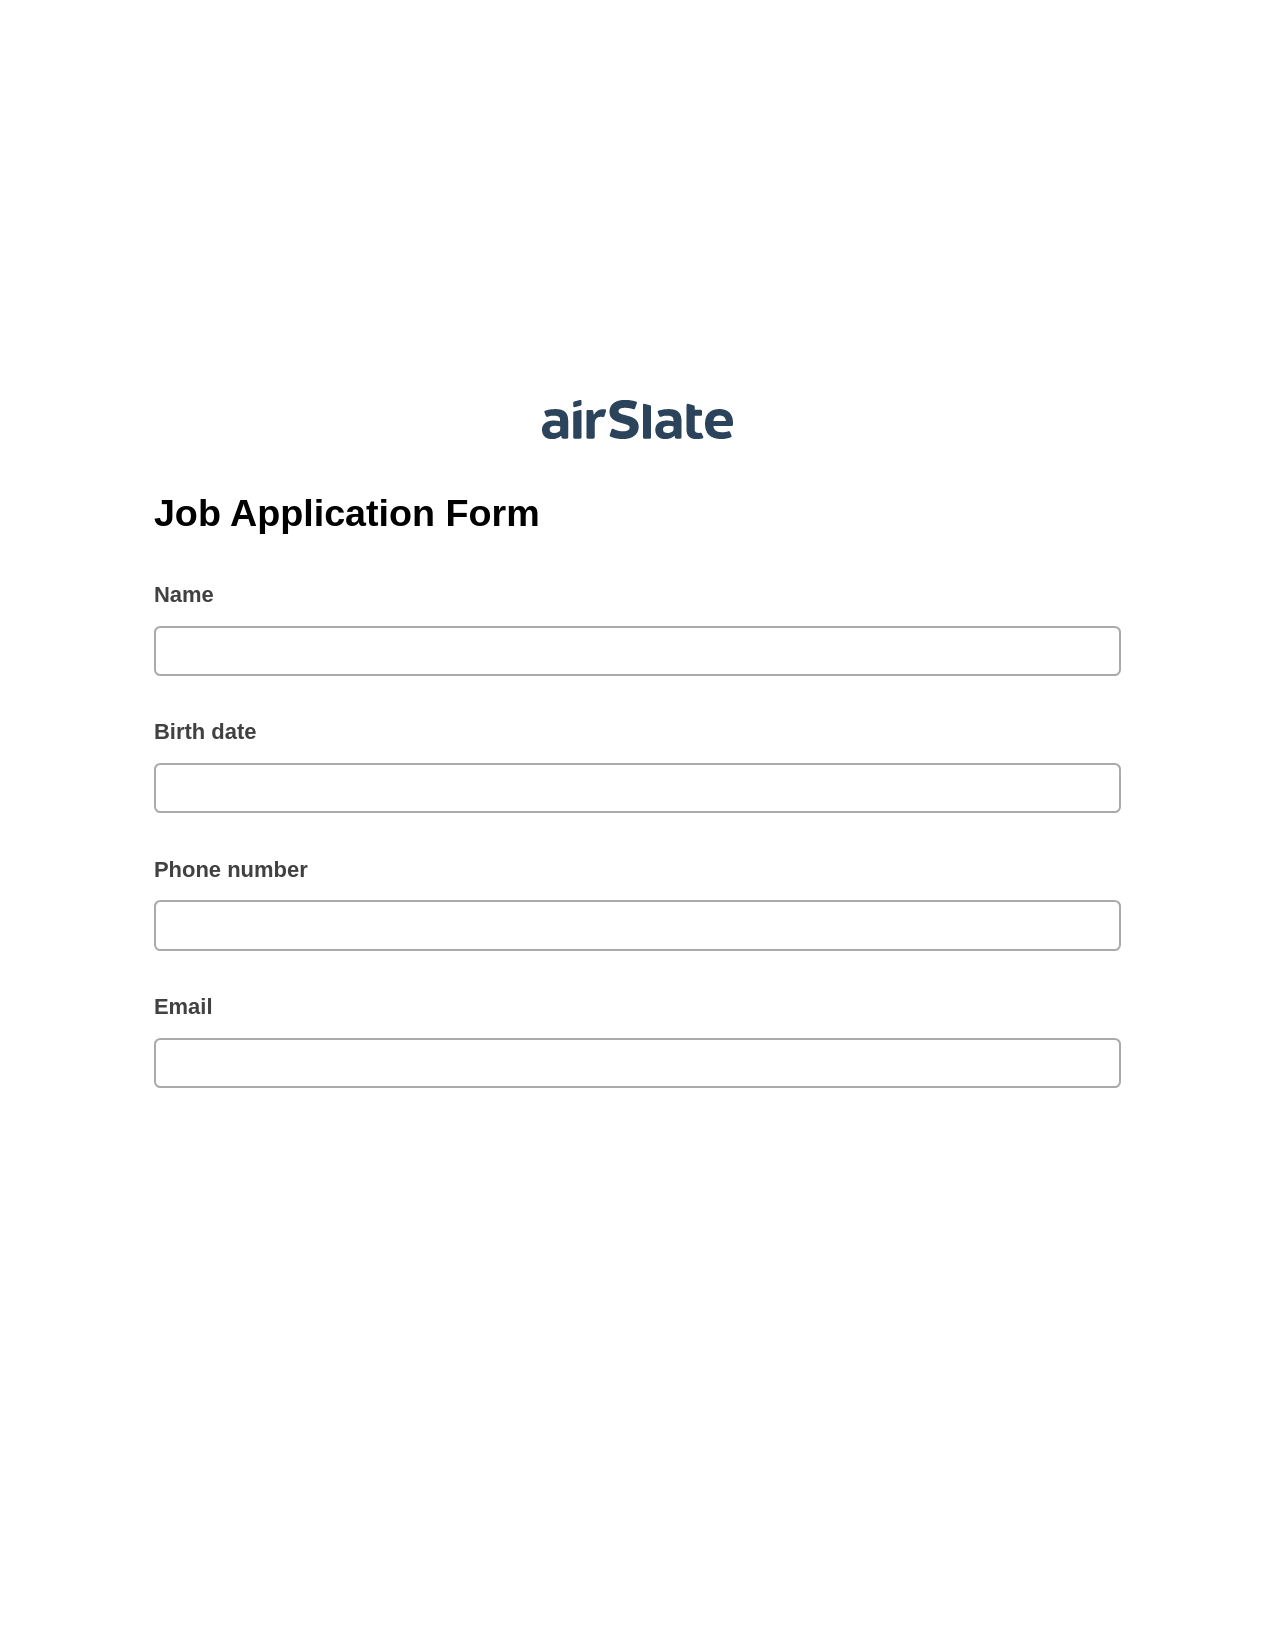 Job Application Form Pre-fill from Google Sheet Dropdown Options Bot, Create Salesforce Record Bot, Text Message Notification Postfinish Bot